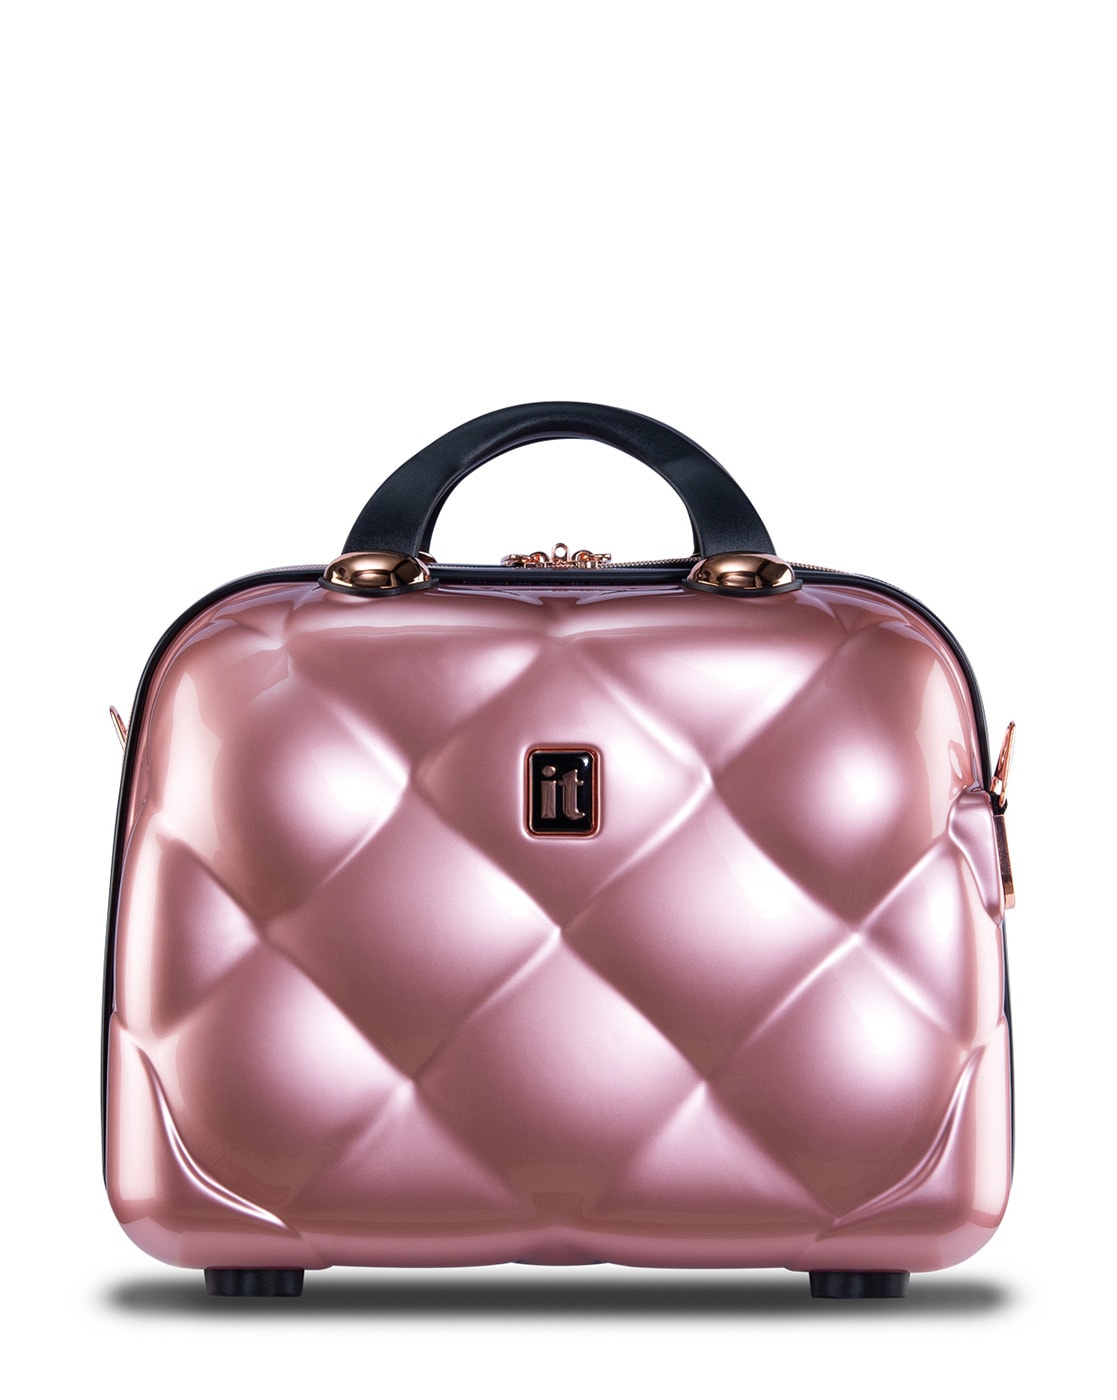 Polo Class Vanity Bag Big -Multicolor : Amazon.in: Bags, Wallets and Luggage